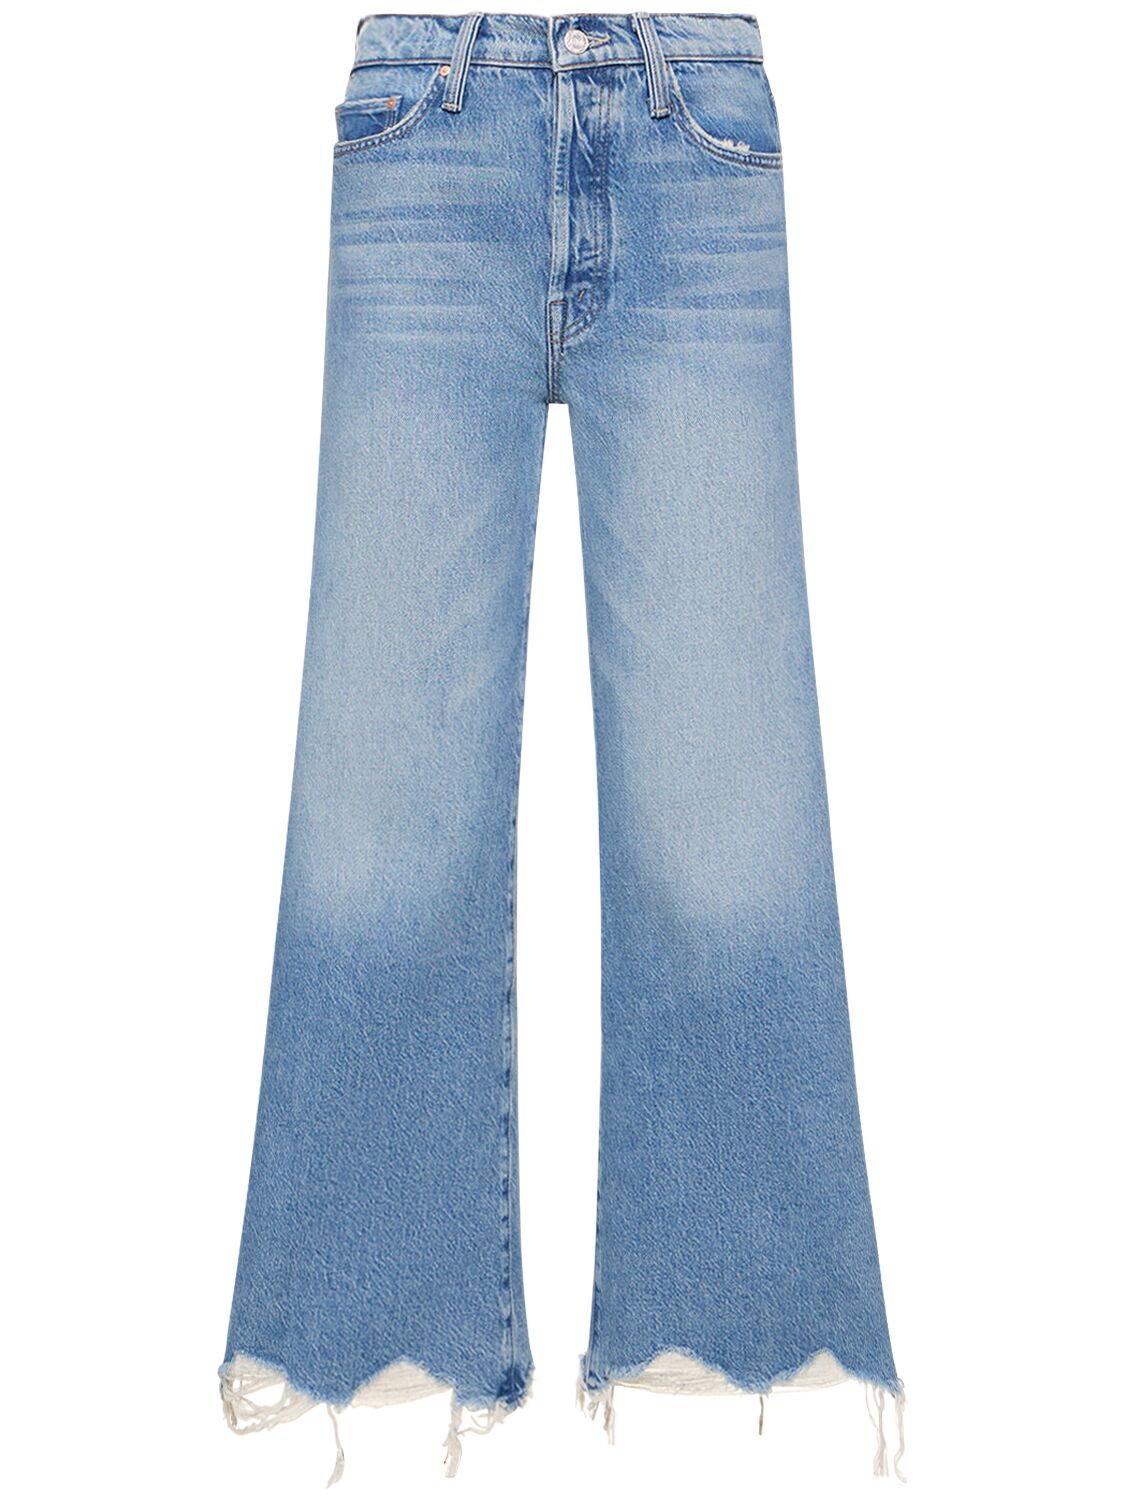 MOTHER THE TOMCAT ROLLER CHEW HIGH RISE JEANS